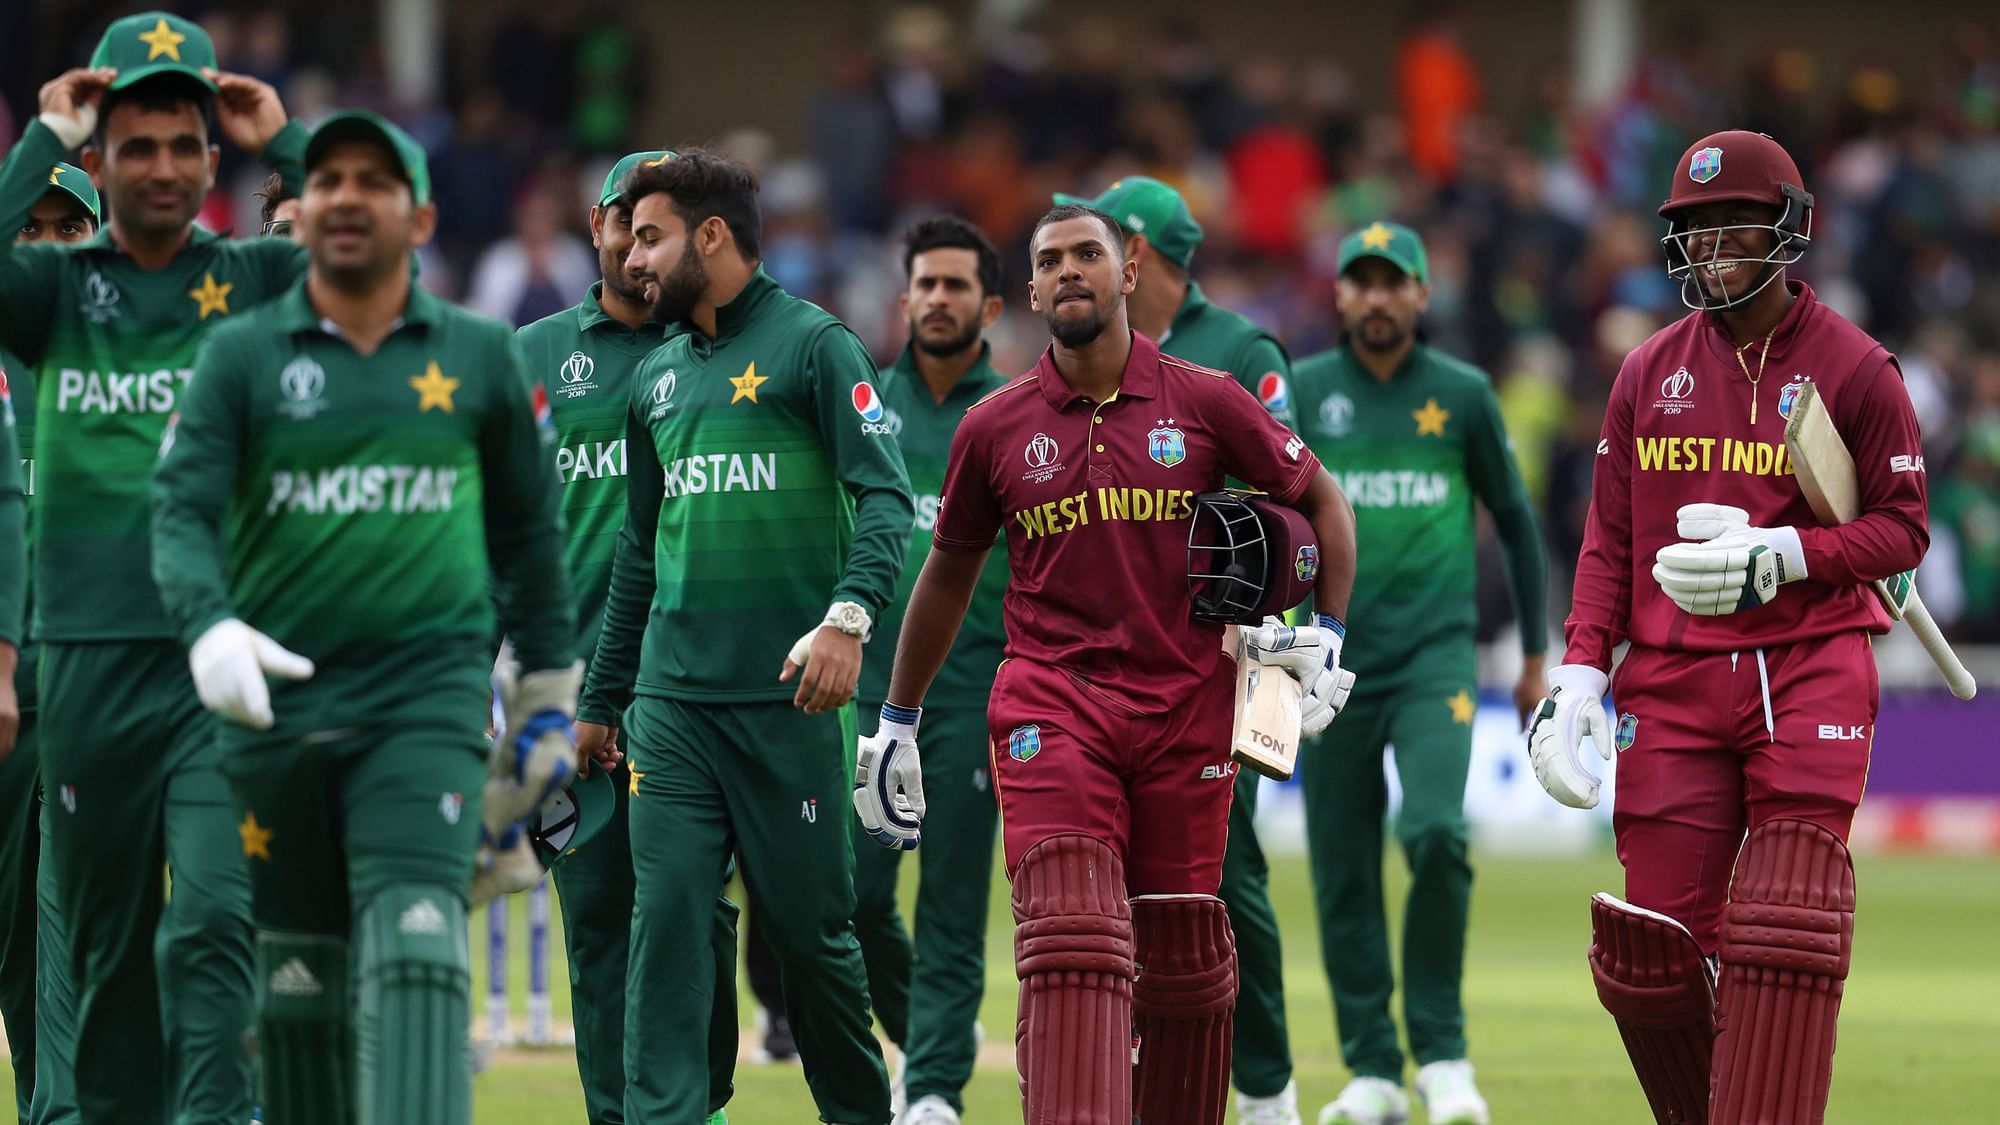 Pakistan faced an embarassing defeat against West Indies in their first game of the World Cup.&nbsp;